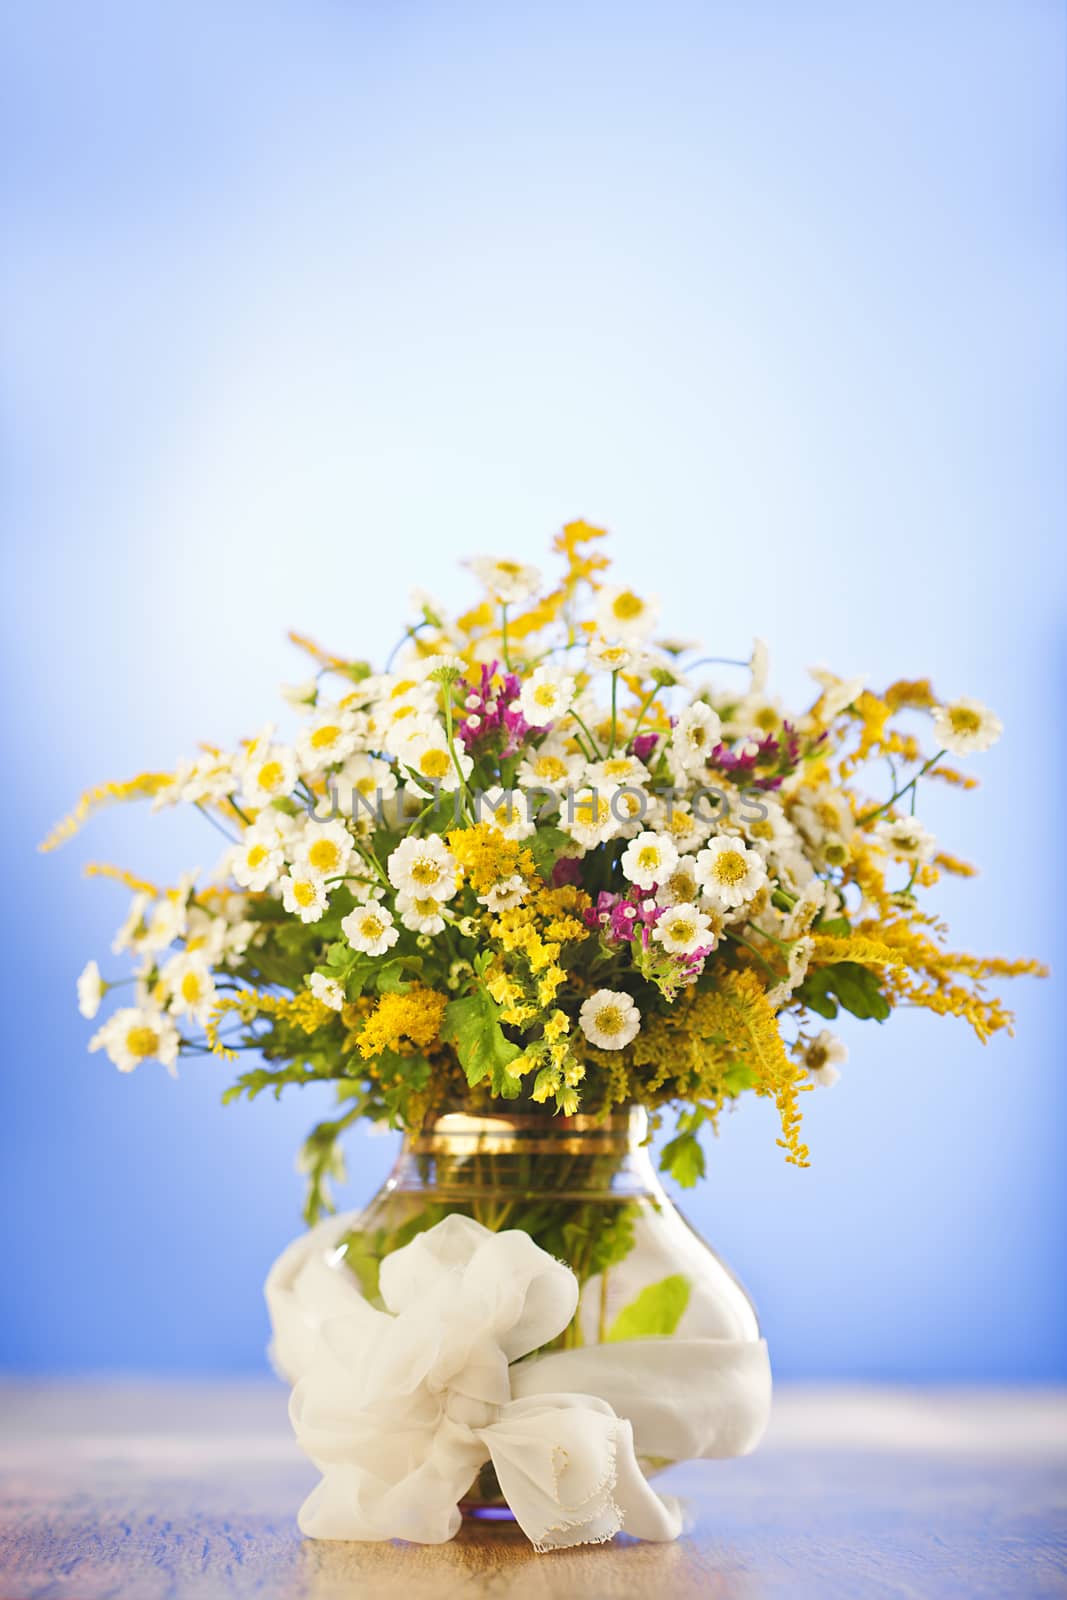 Beautiful bouquet of wildflowers in vase on blue background